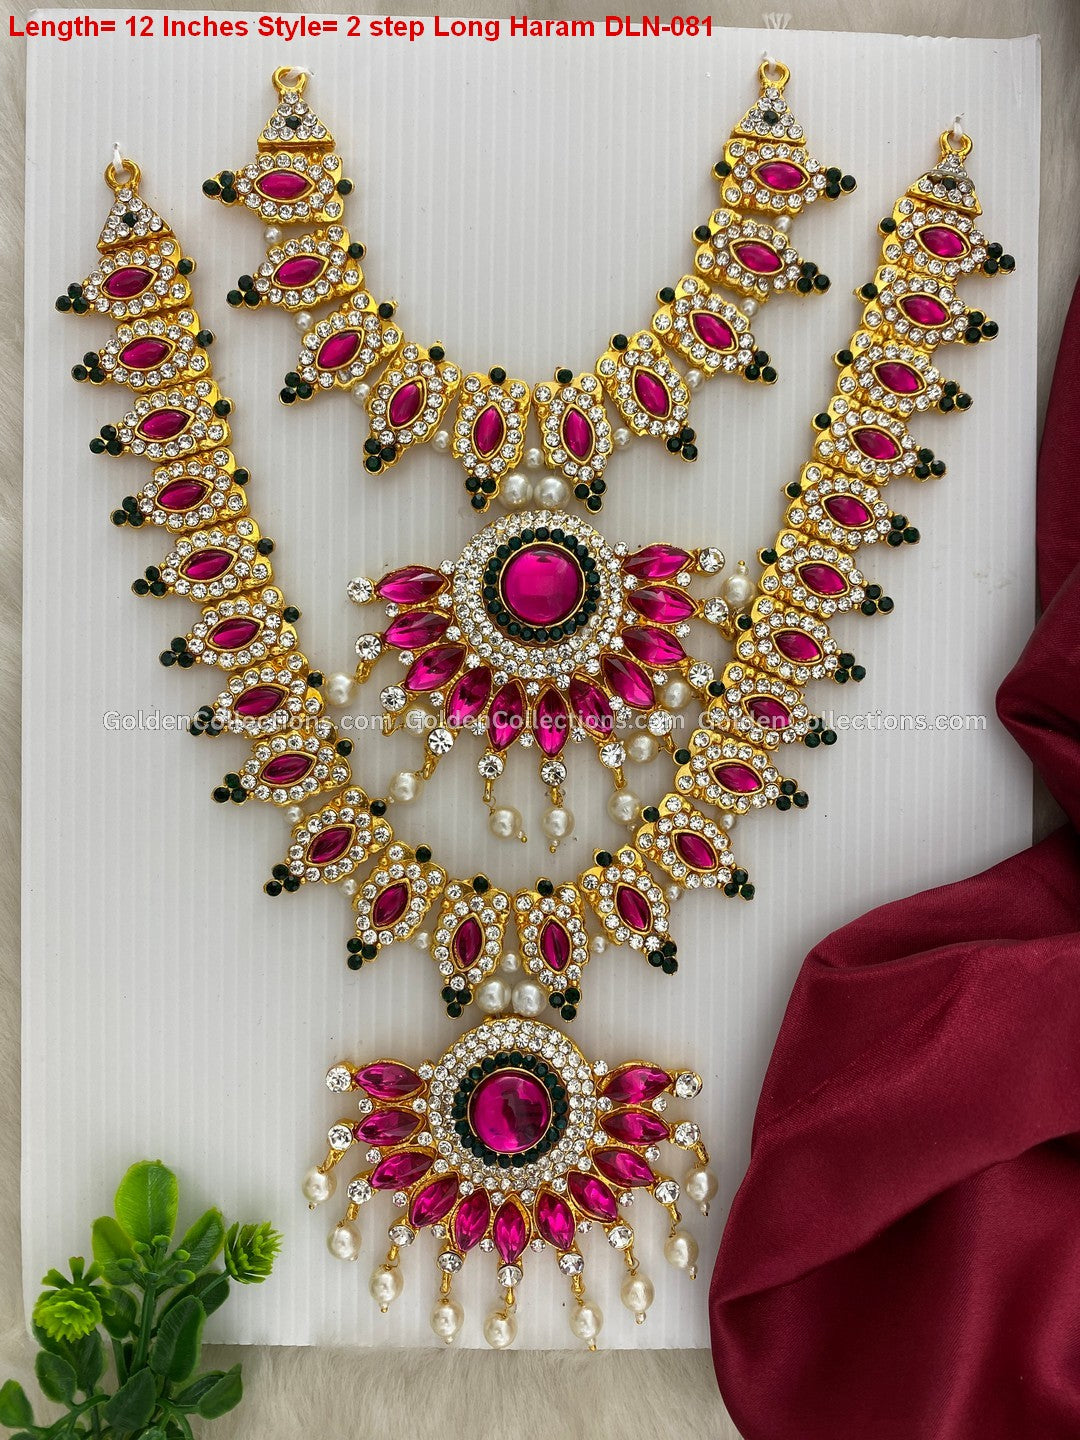 Deity Long Necklace Designs: Discover Divine Creations DLN-081